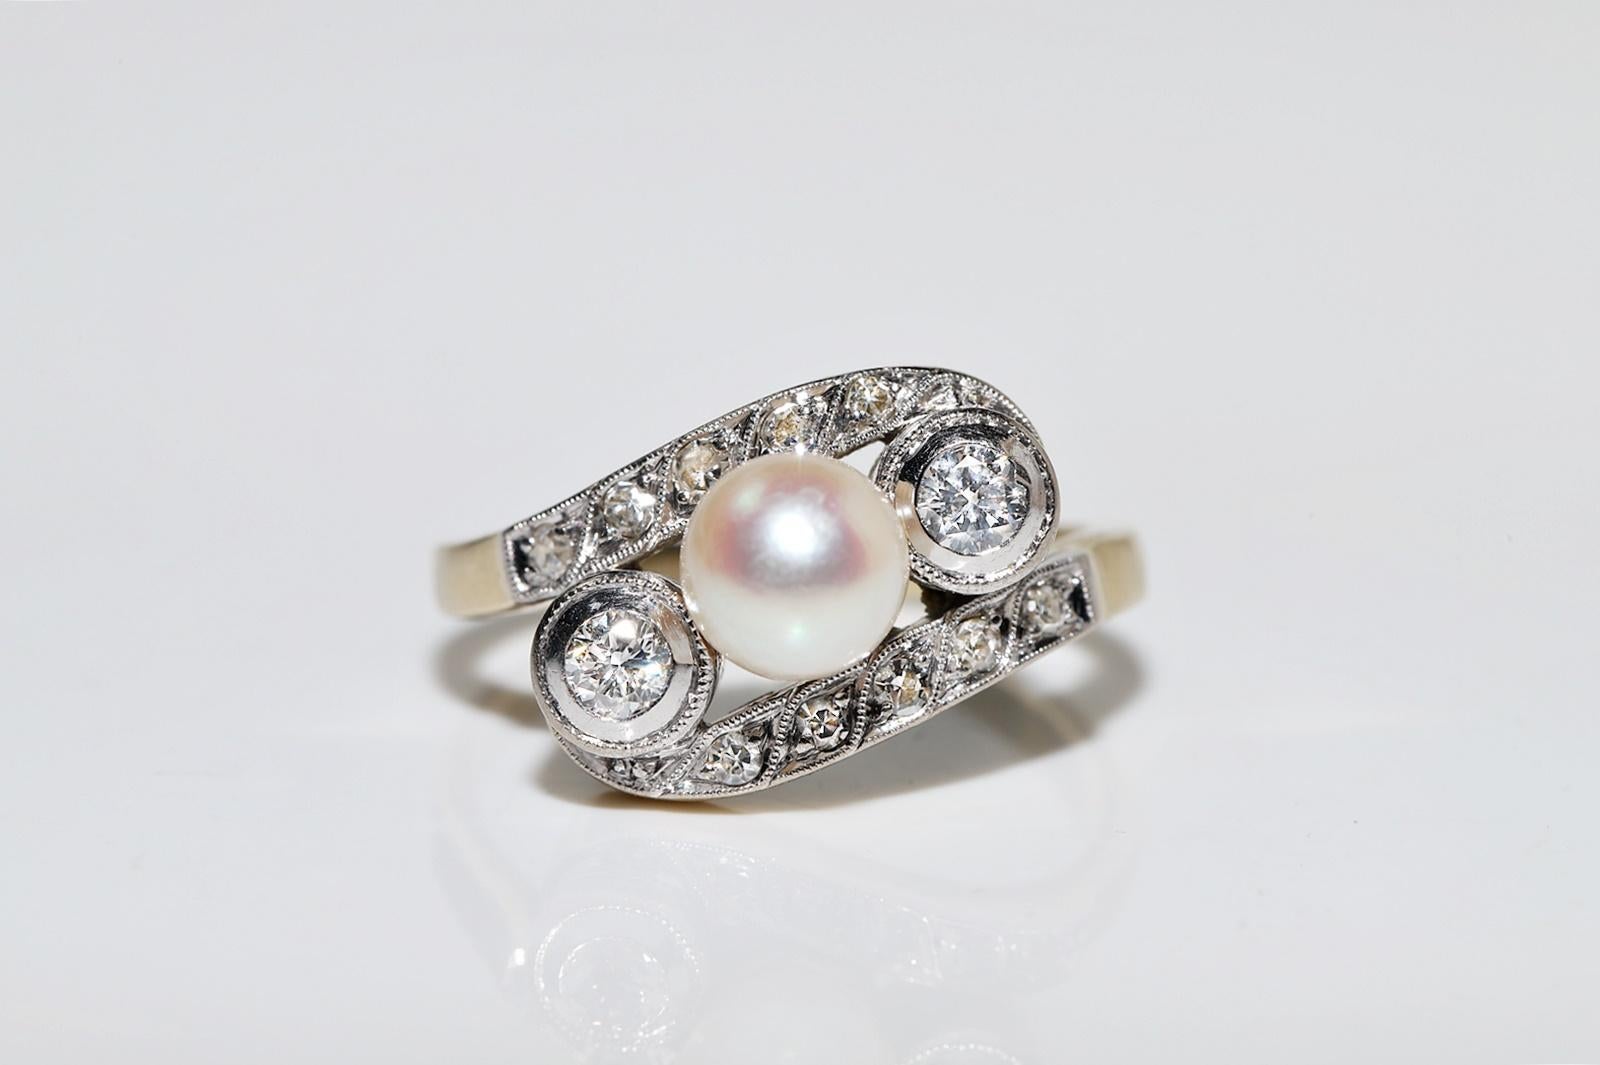 Antique Circa 1920s Art Deco 14k Gold Natural Diamond And Pearl Ring In Good Condition For Sale In Fatih/İstanbul, 34